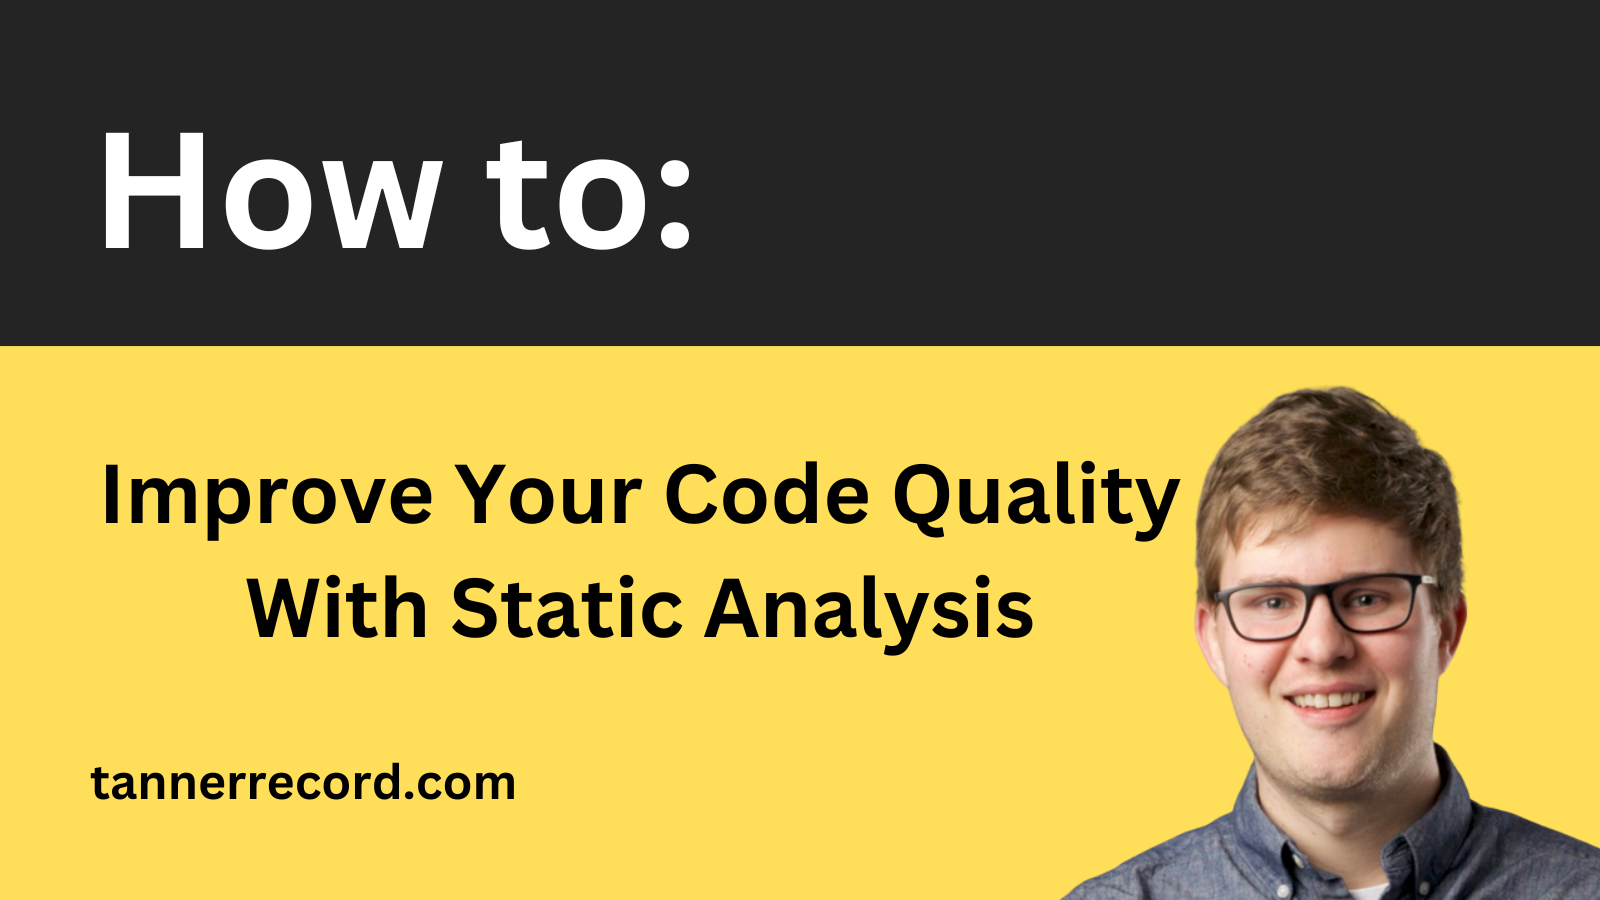 SWPD#002: Improve Your Code Quality With Static Analysis